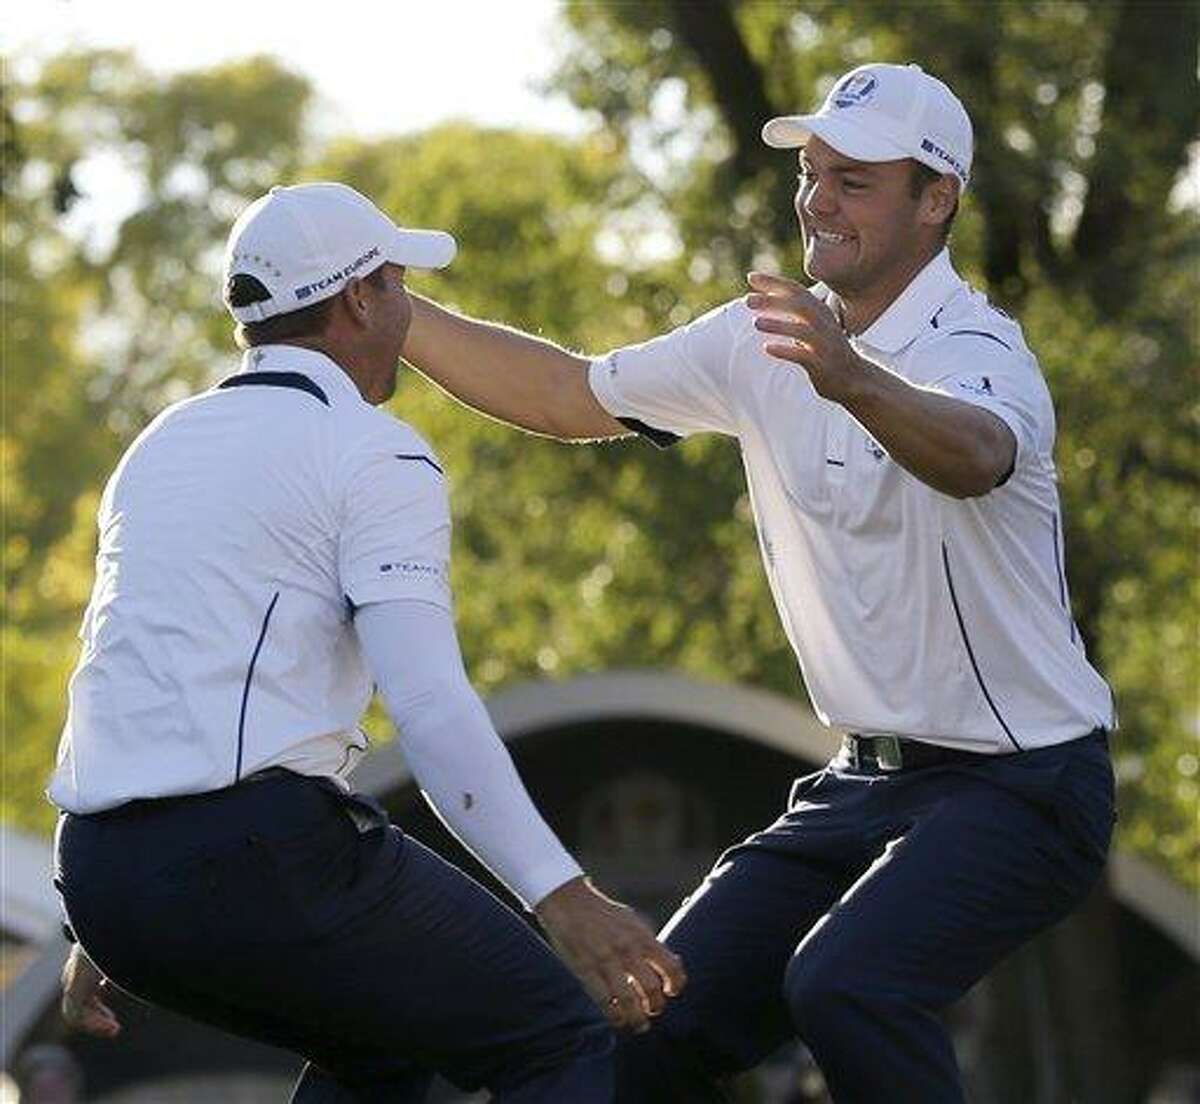 Europe's Martin Kaymer leaps into the arms of teammate Sergio Garcia after winning the Ryder Cup PGA golf tournament Sunday, Sept. 30, 2012, at the Medinah Country Club in Medinah, Ill. (AP Photo/David J. Phillip)